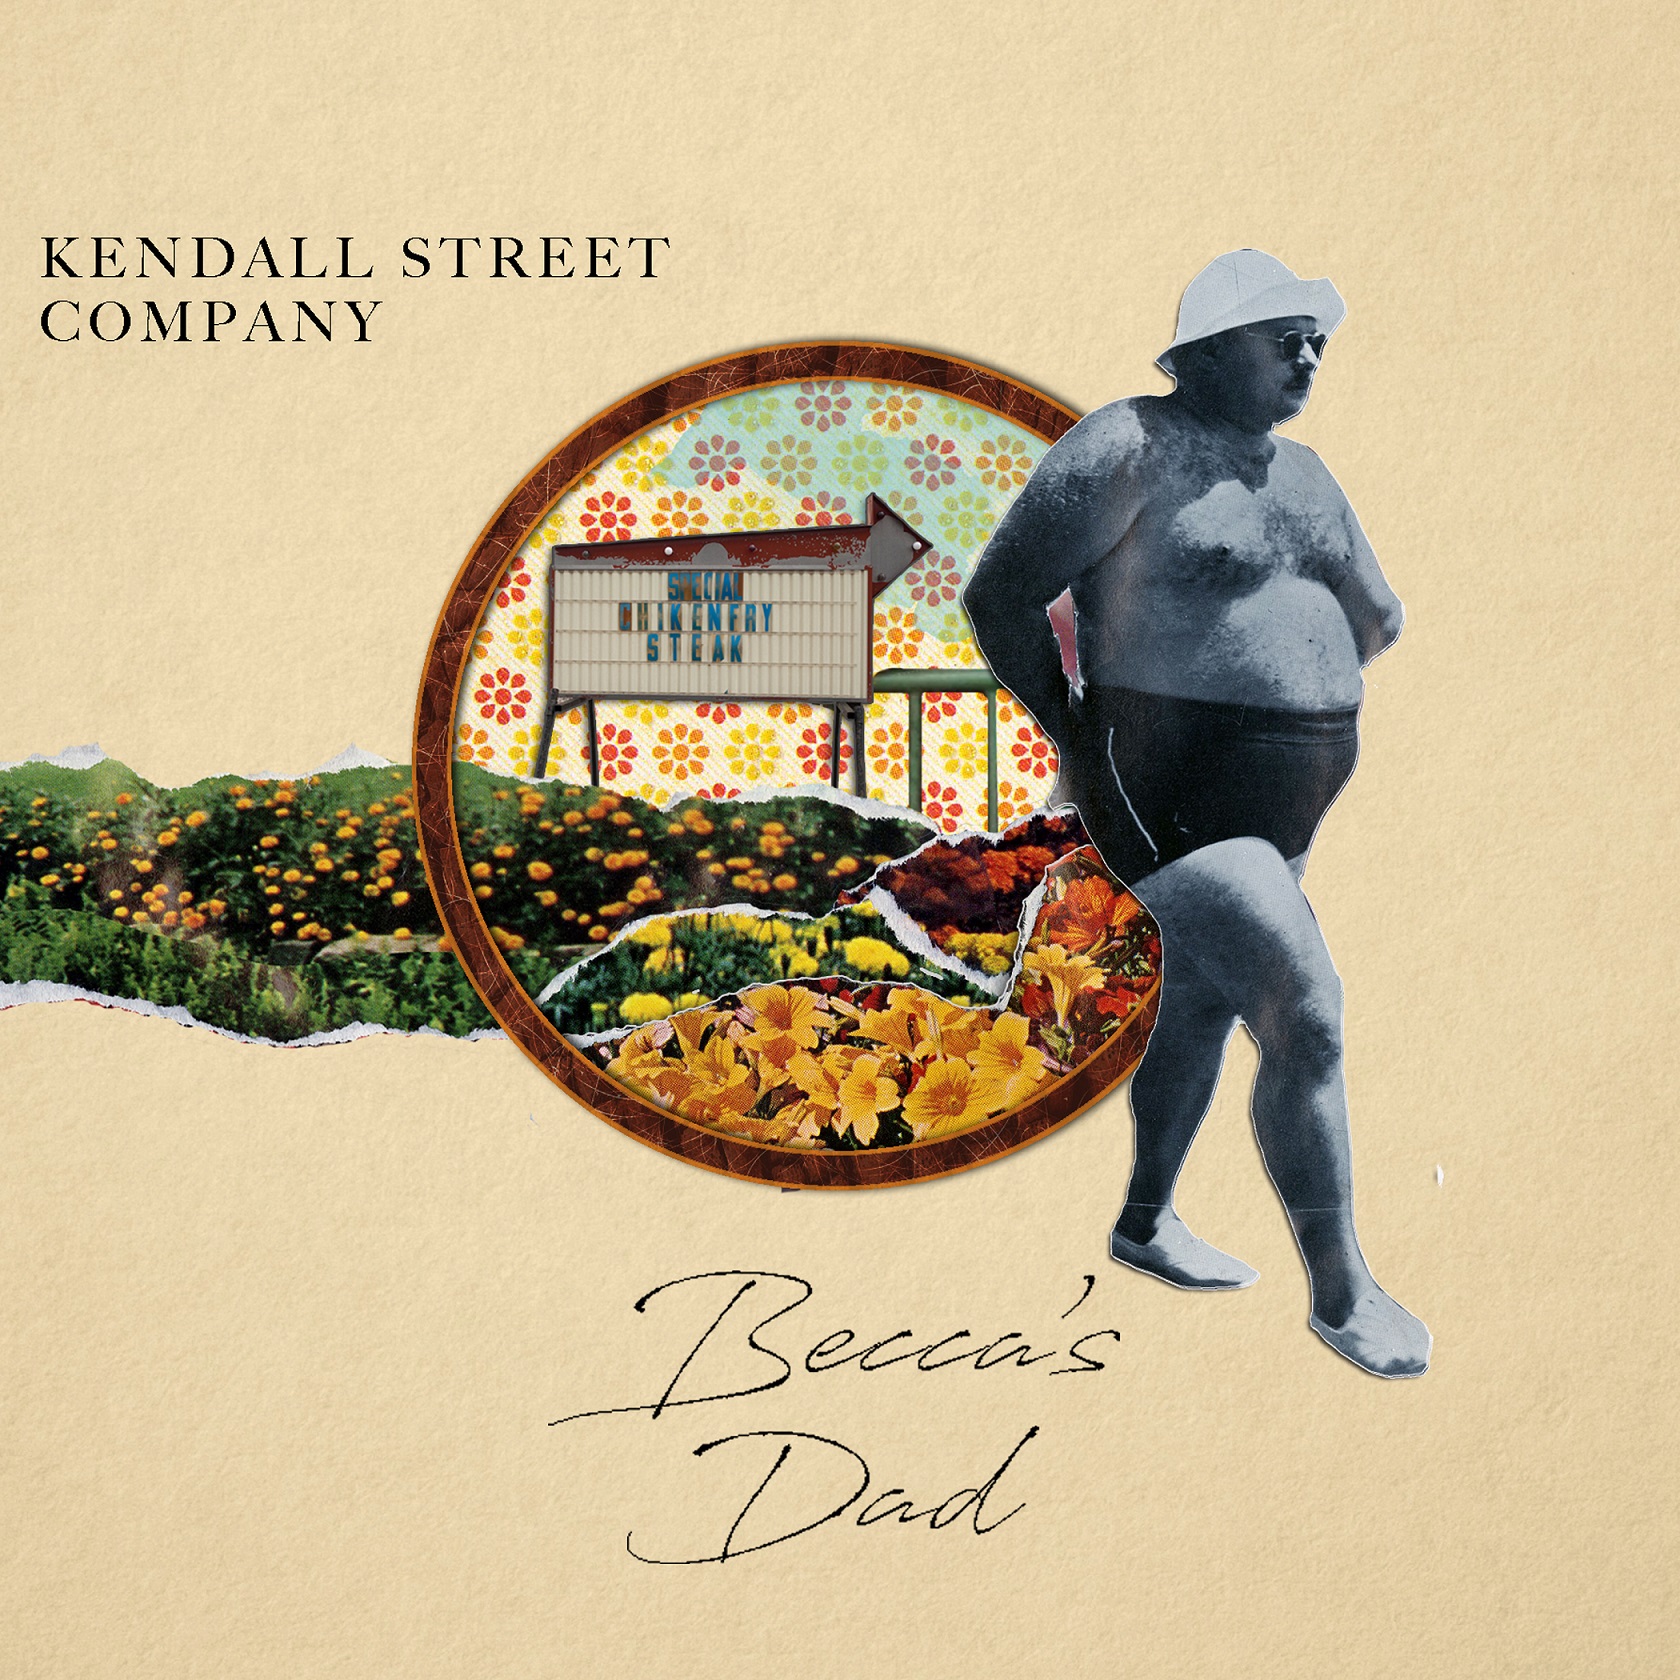 Kendall Street Company Release New Single Featuring Andy Hall ”Becca’s Dad”